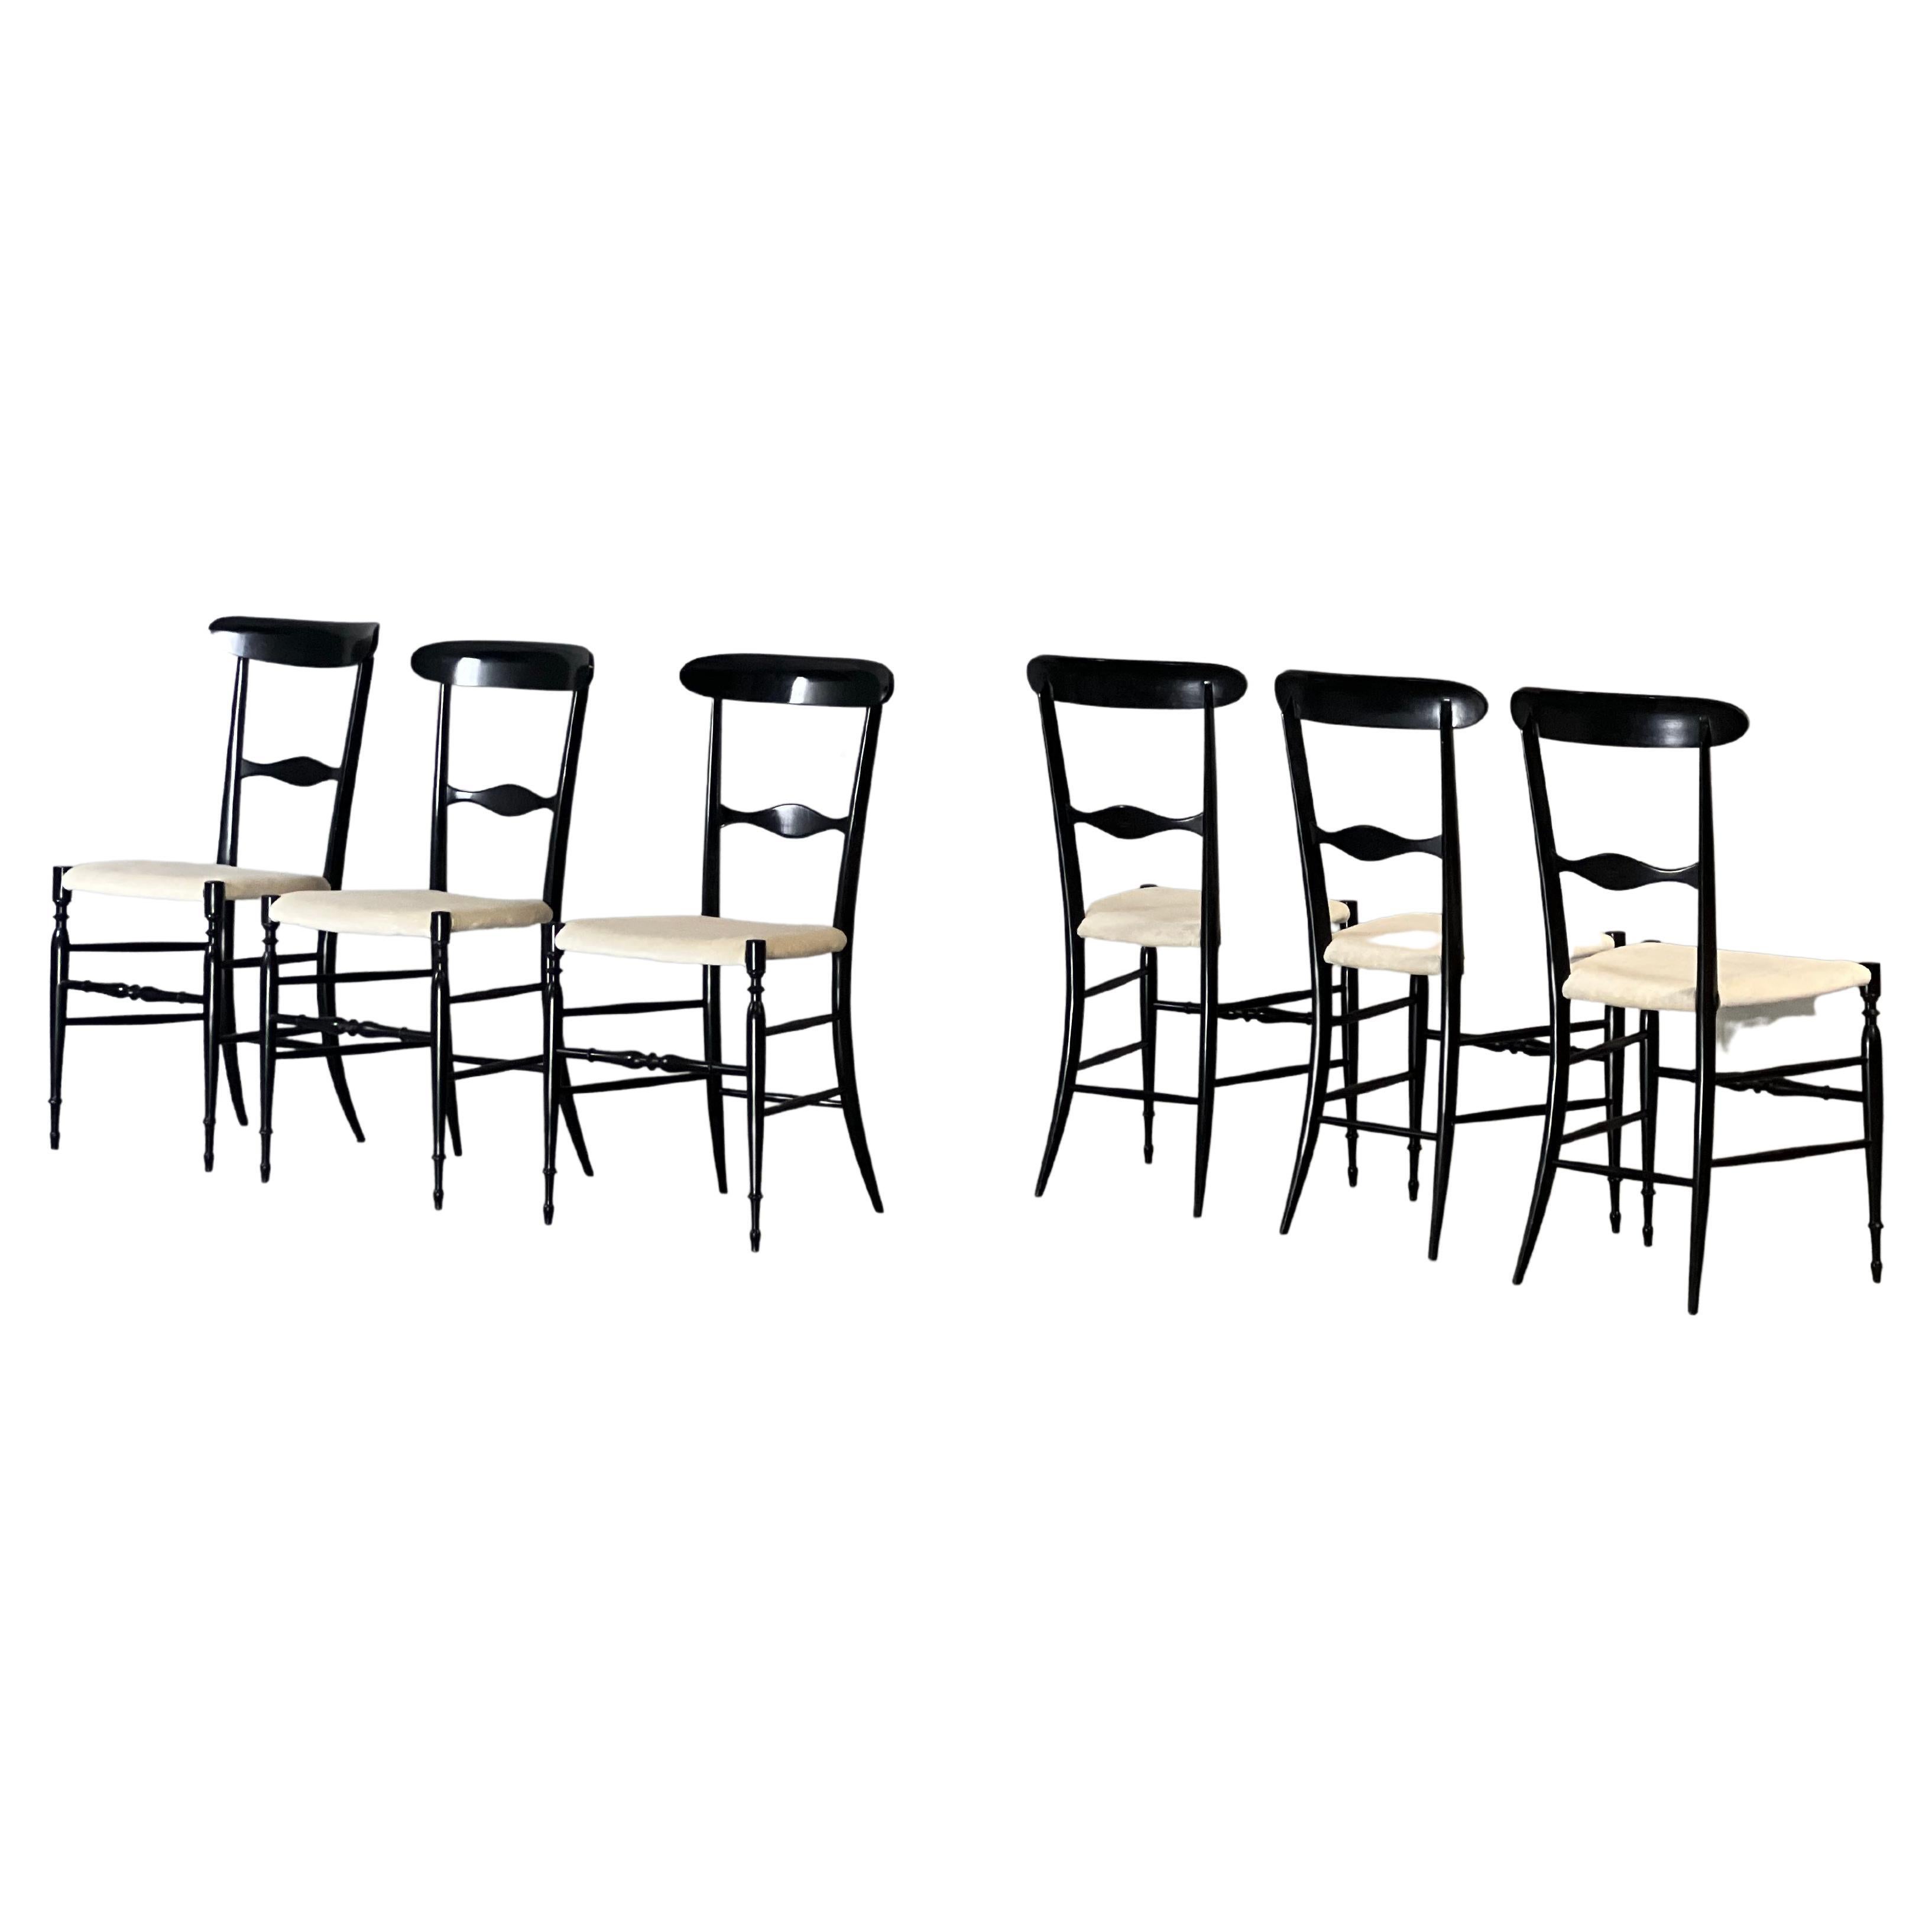 Set of 6 Fratelli Levaggi Dining Chairs by Campanino Chiavari, Italy, 1950s For Sale